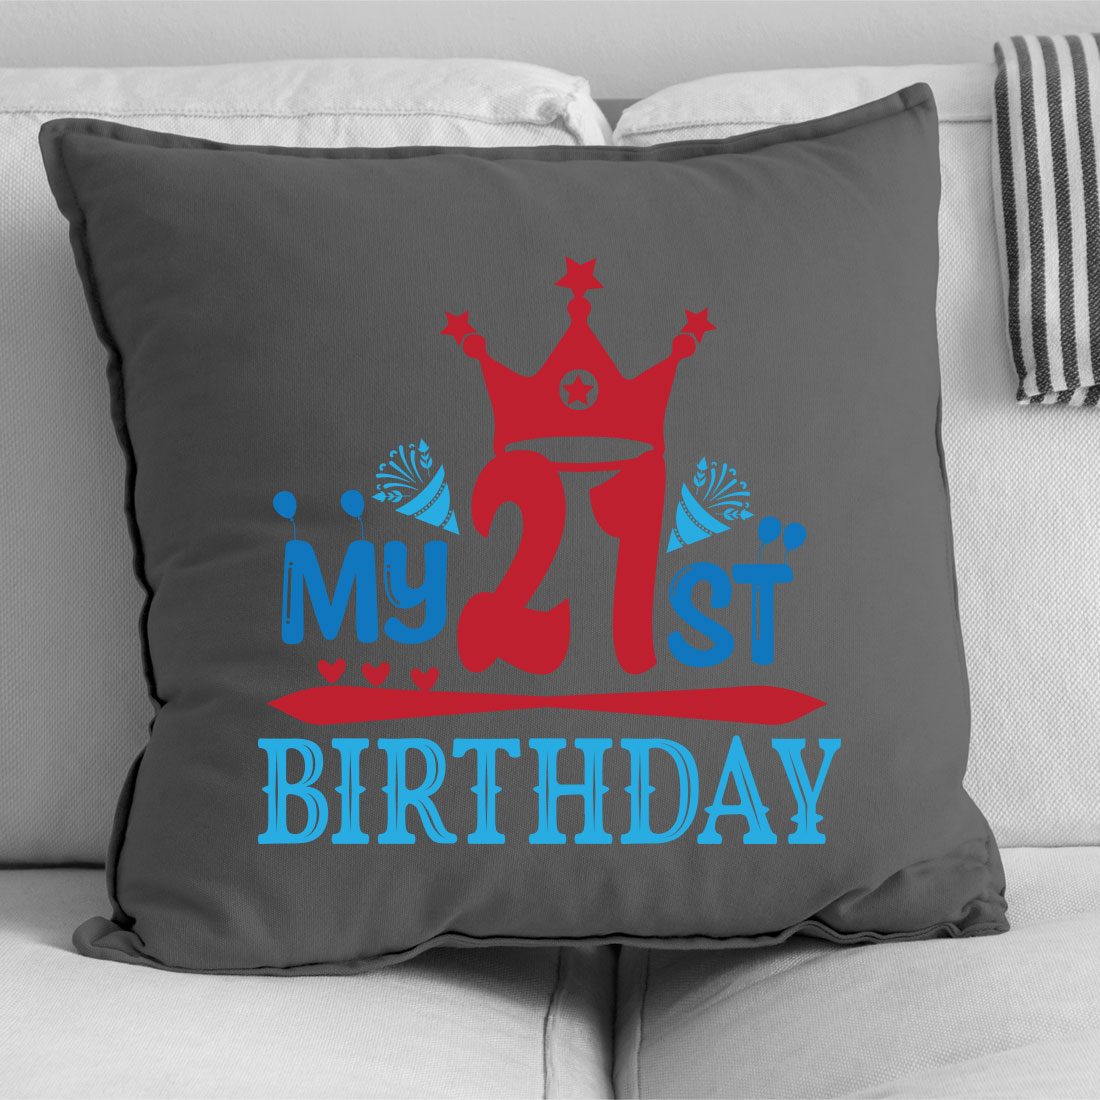 Pillow that says my 21st birthday on it.